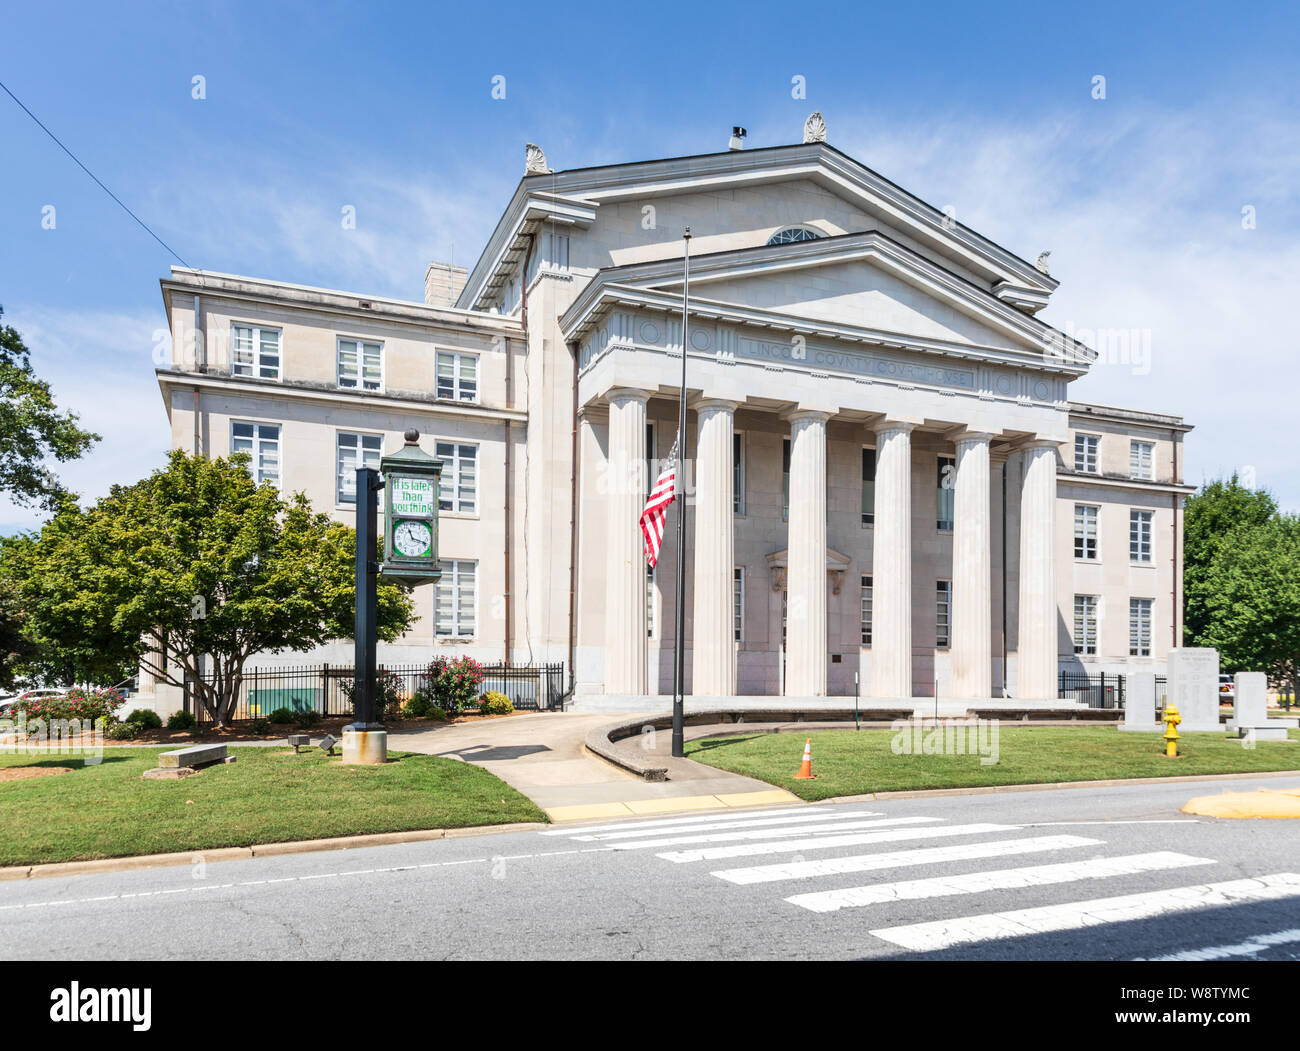 LINCOLNTON, NC, USA-9 AUGUST 2019: The Lincoln county courthouse in downtown Lincolnton, with the American flag flying at half-mast. Stock Photo